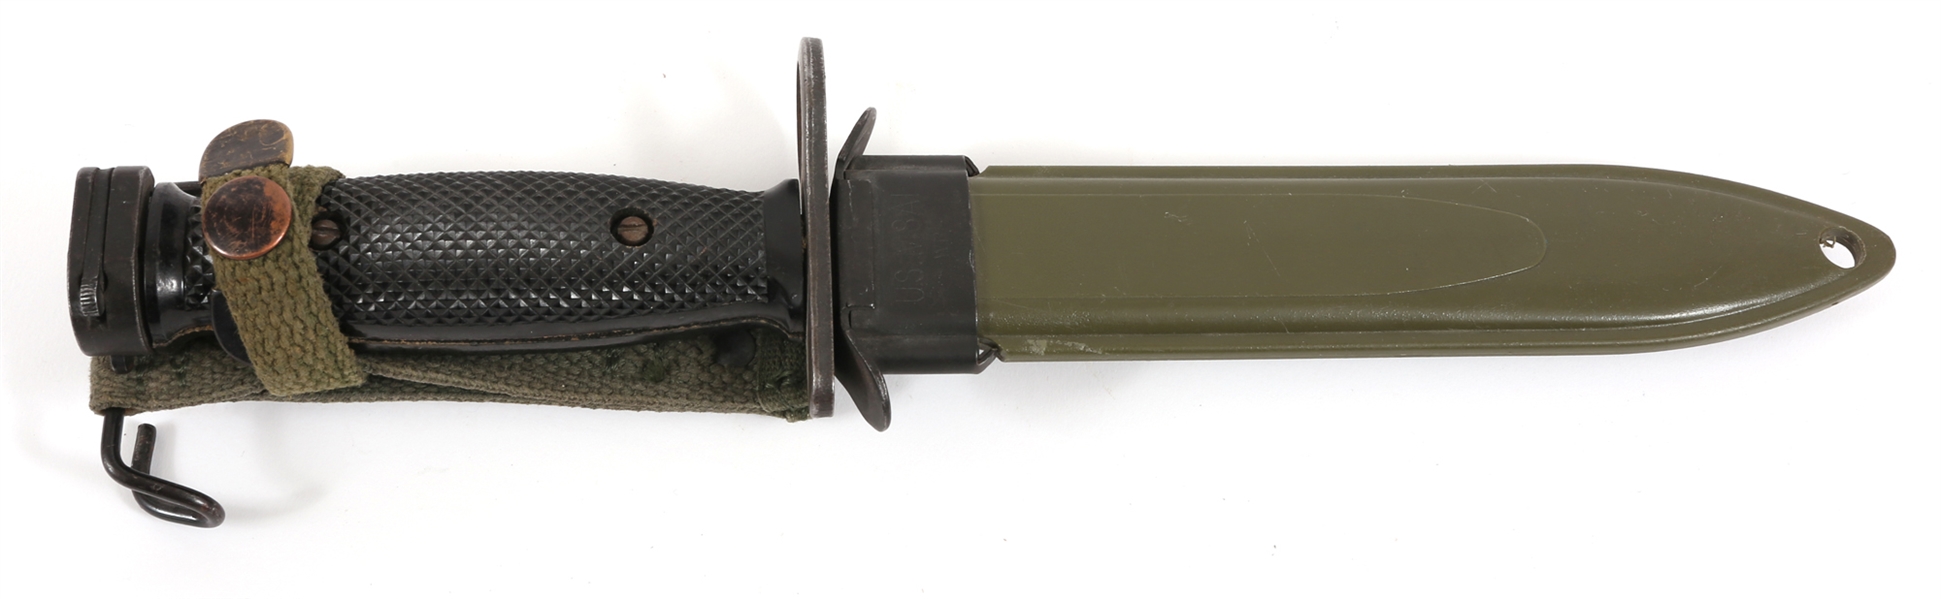 US MILITARY M8A1 COMBAT KNIFE WITH SCABBARD